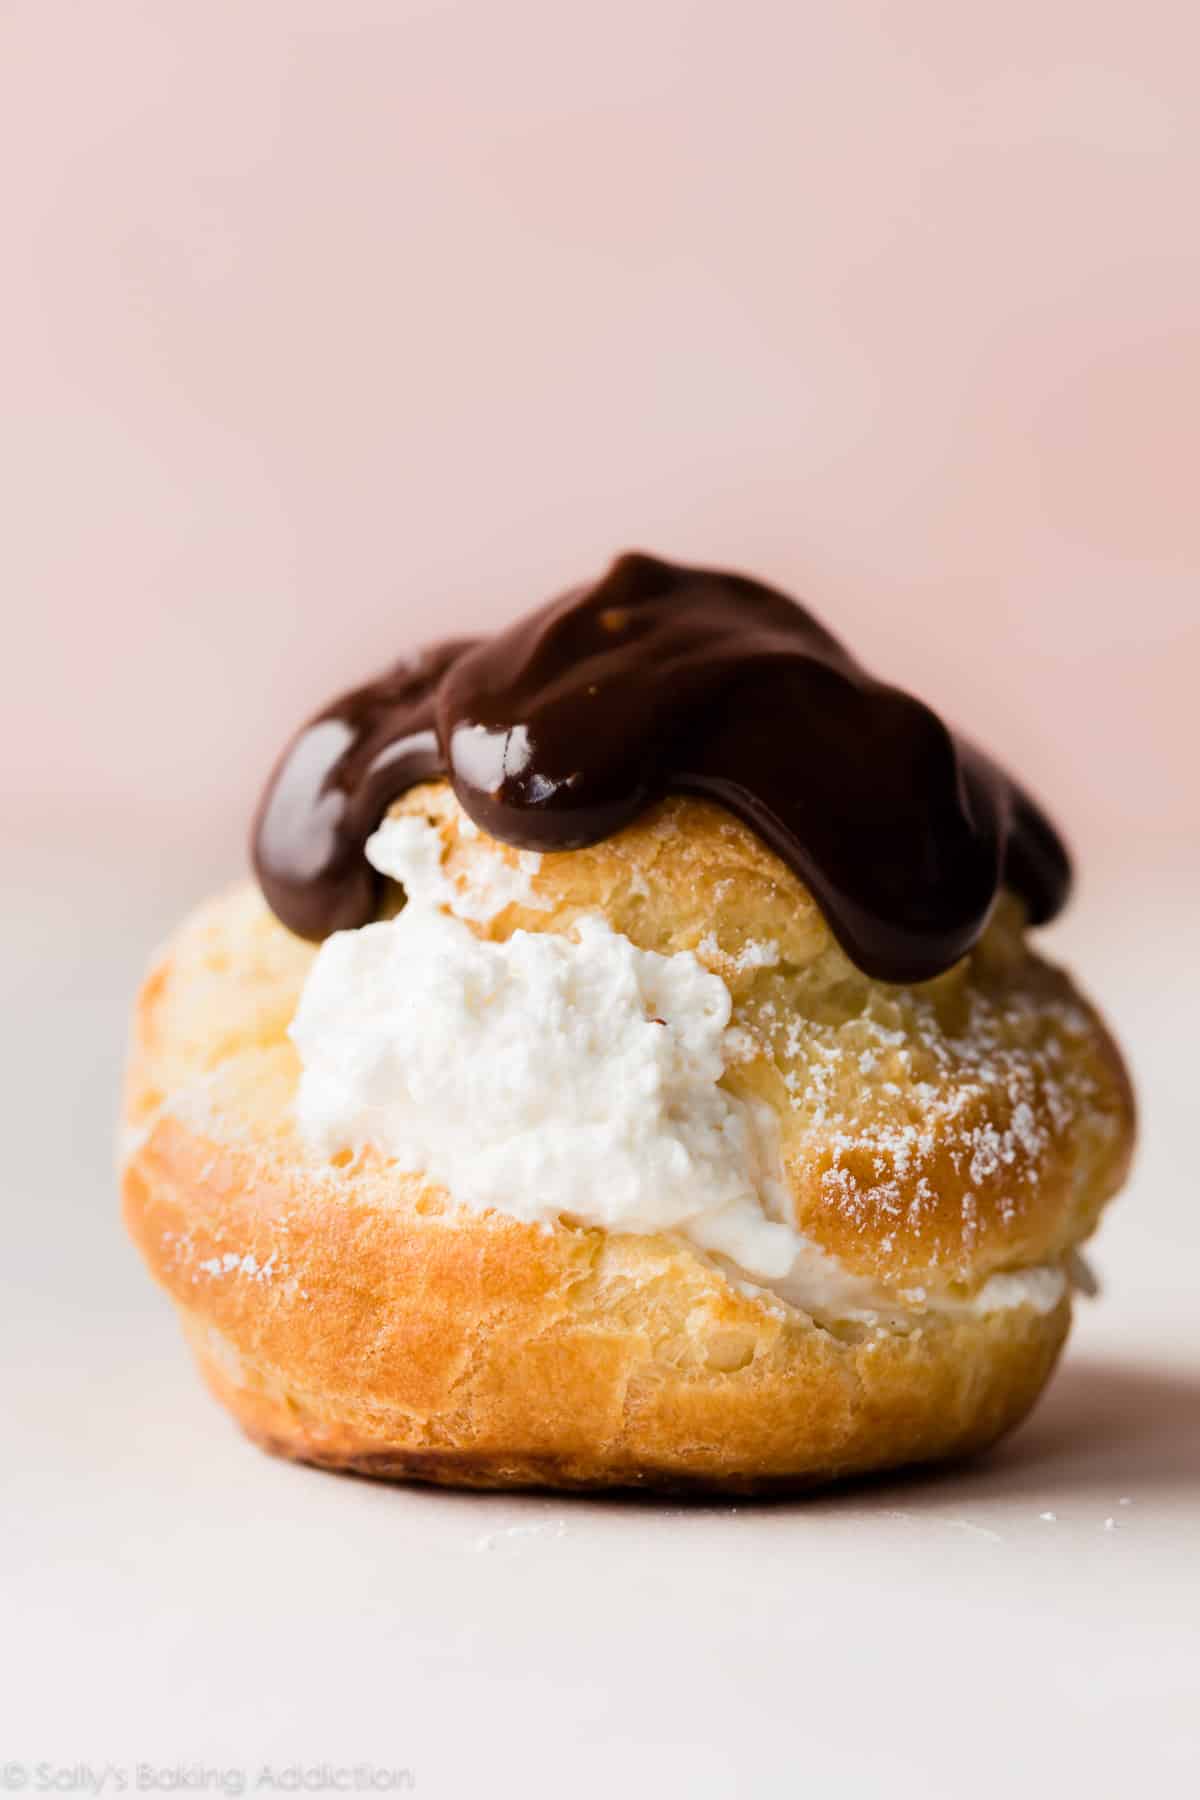 one cream puff topped with chocolate ganache